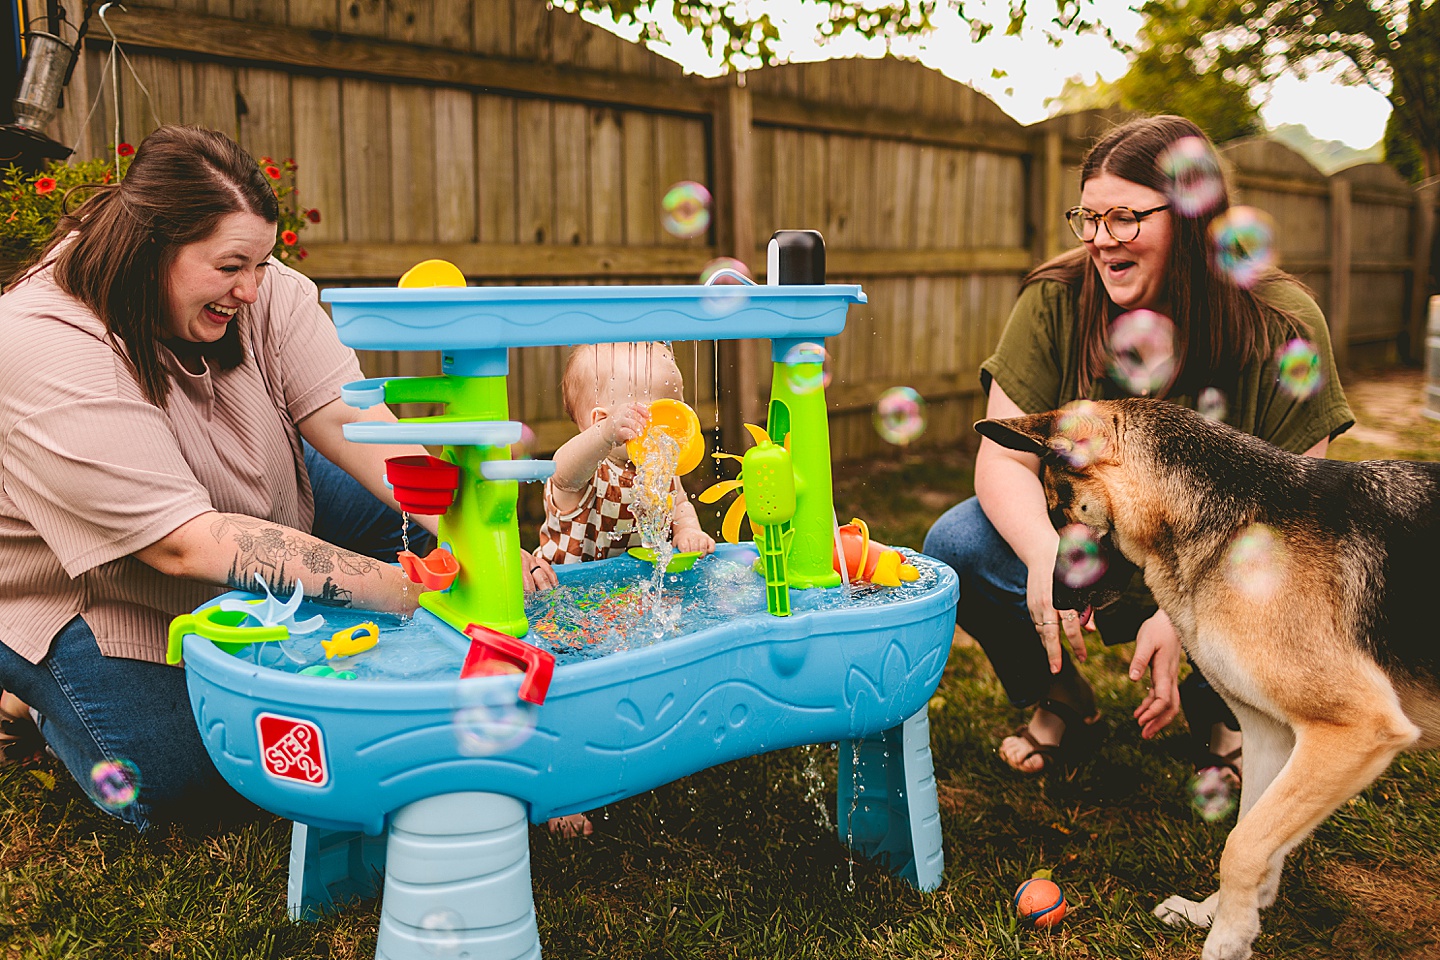 One year old baby plays at water table outside in NC